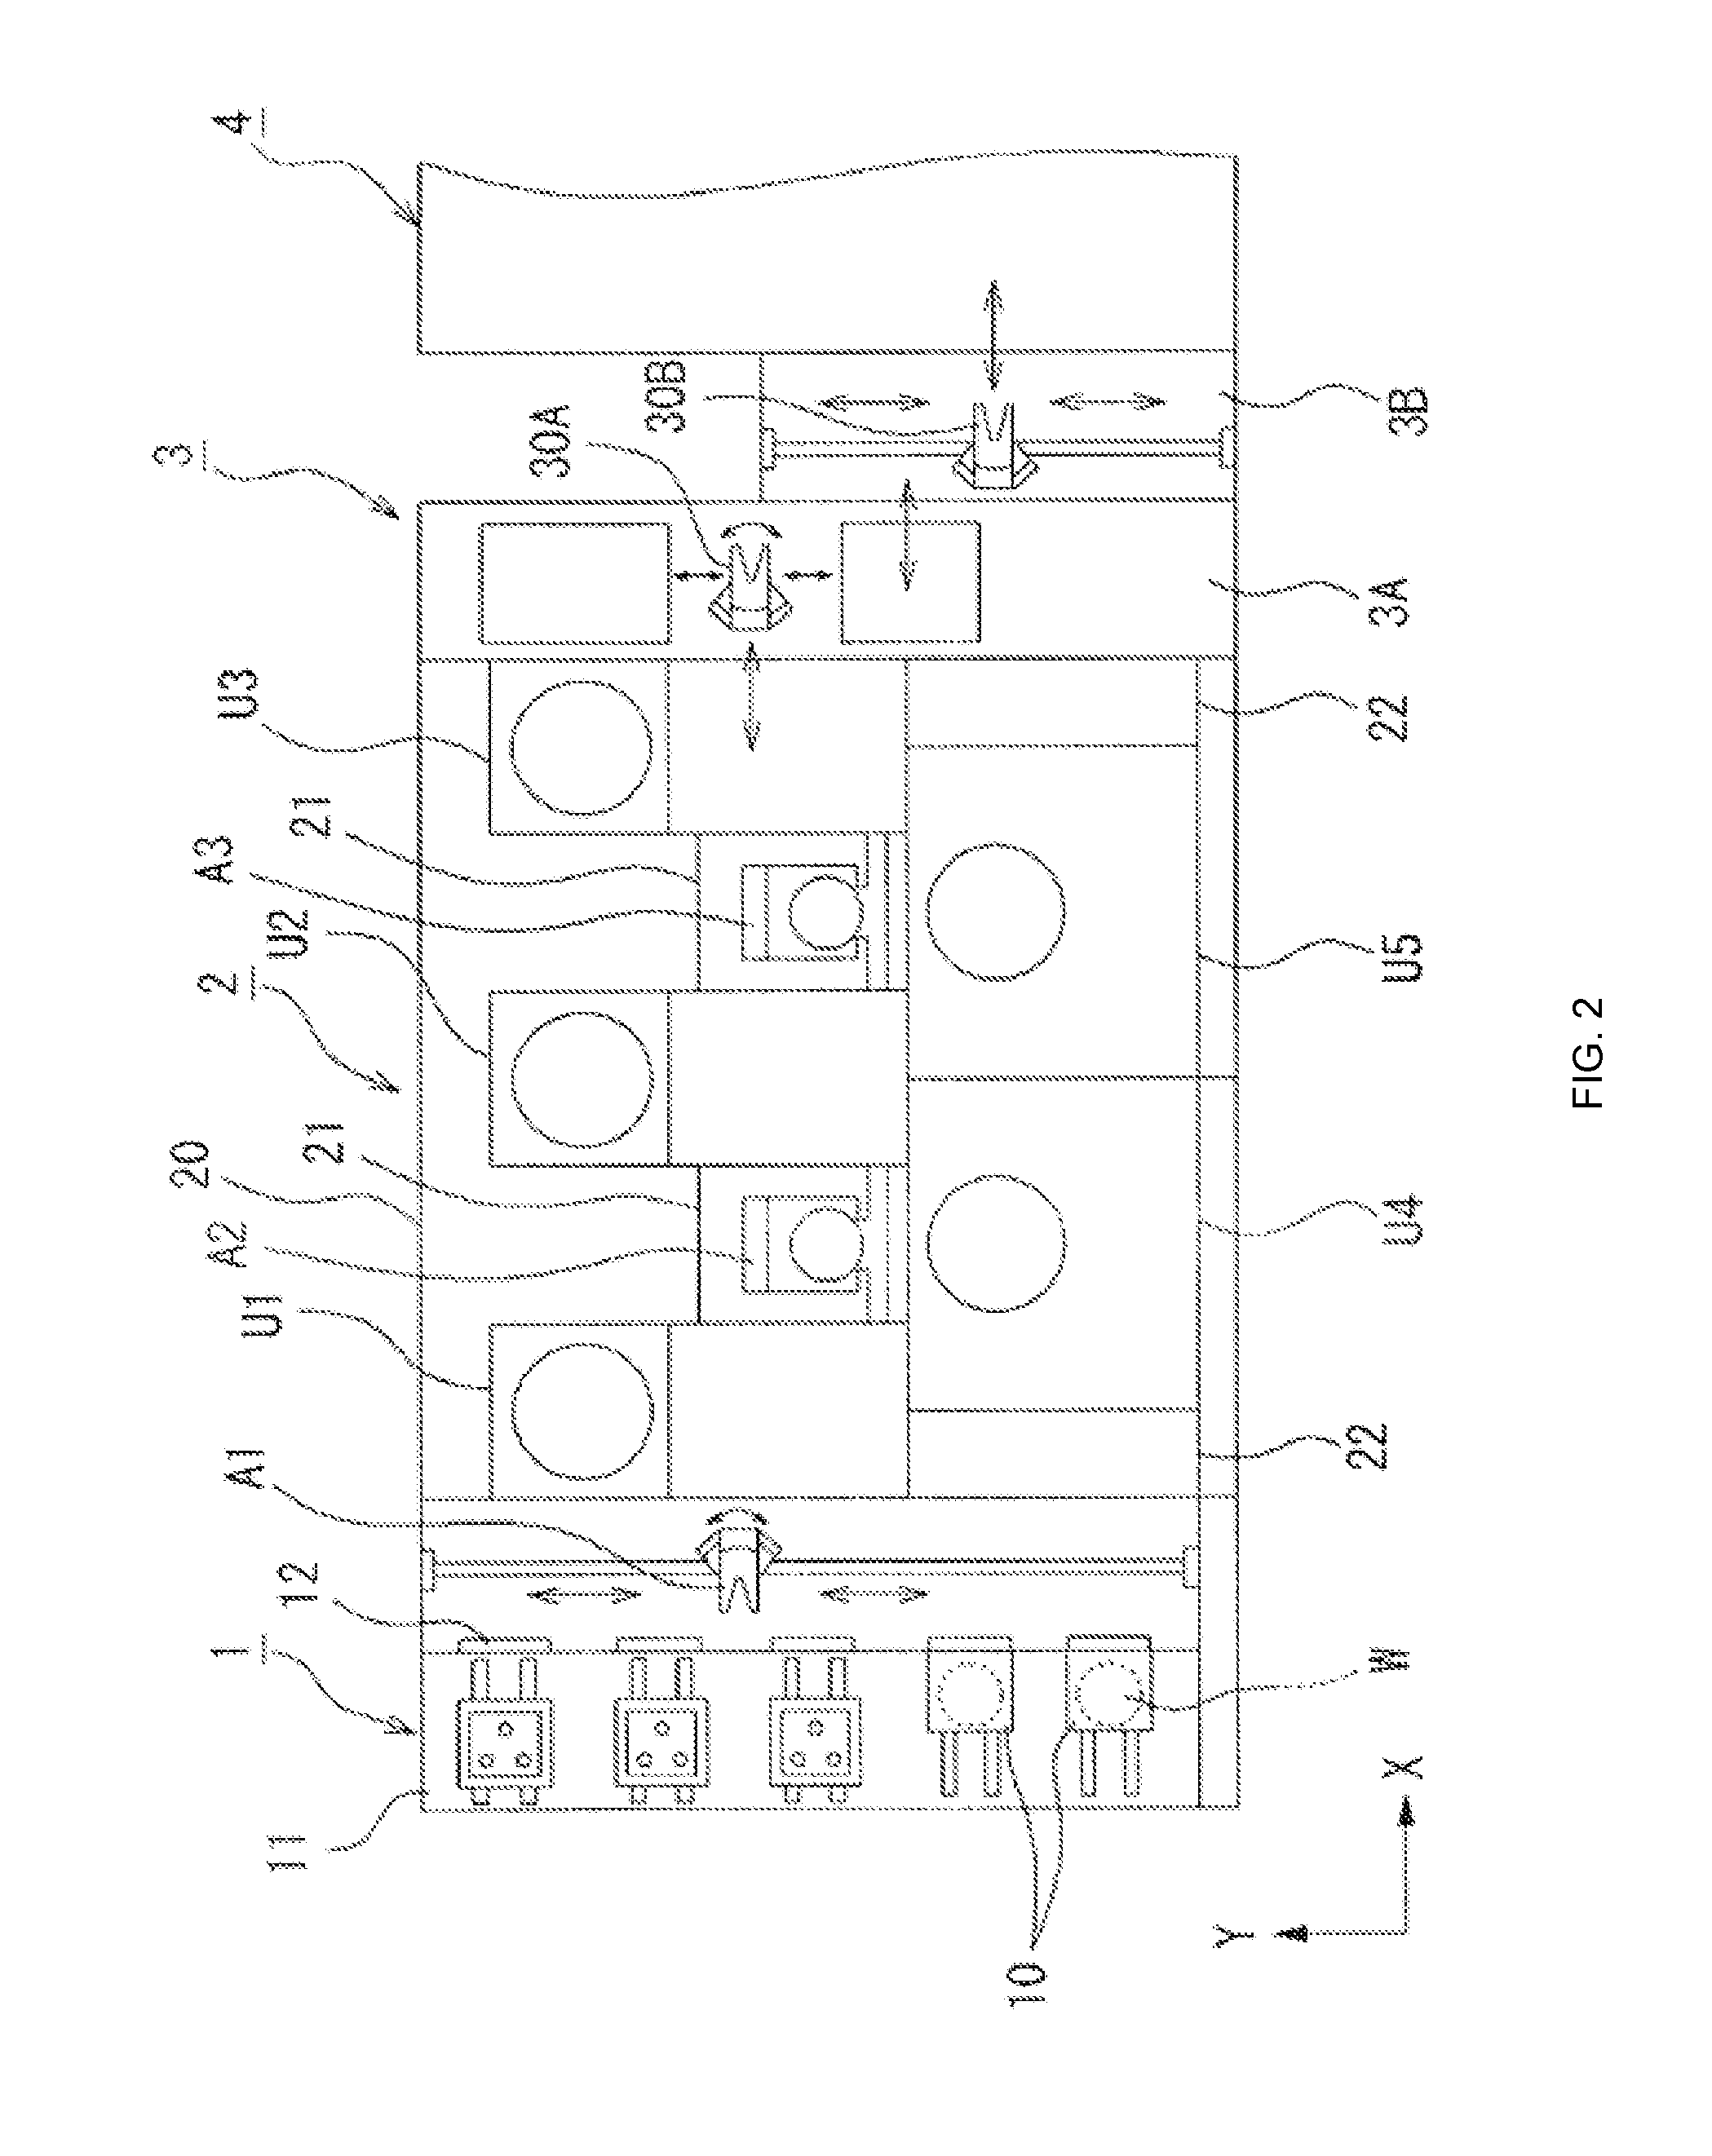 Method and apparatus for multiple recirculation and filtration cycles per dispense in a photoresist dispense system